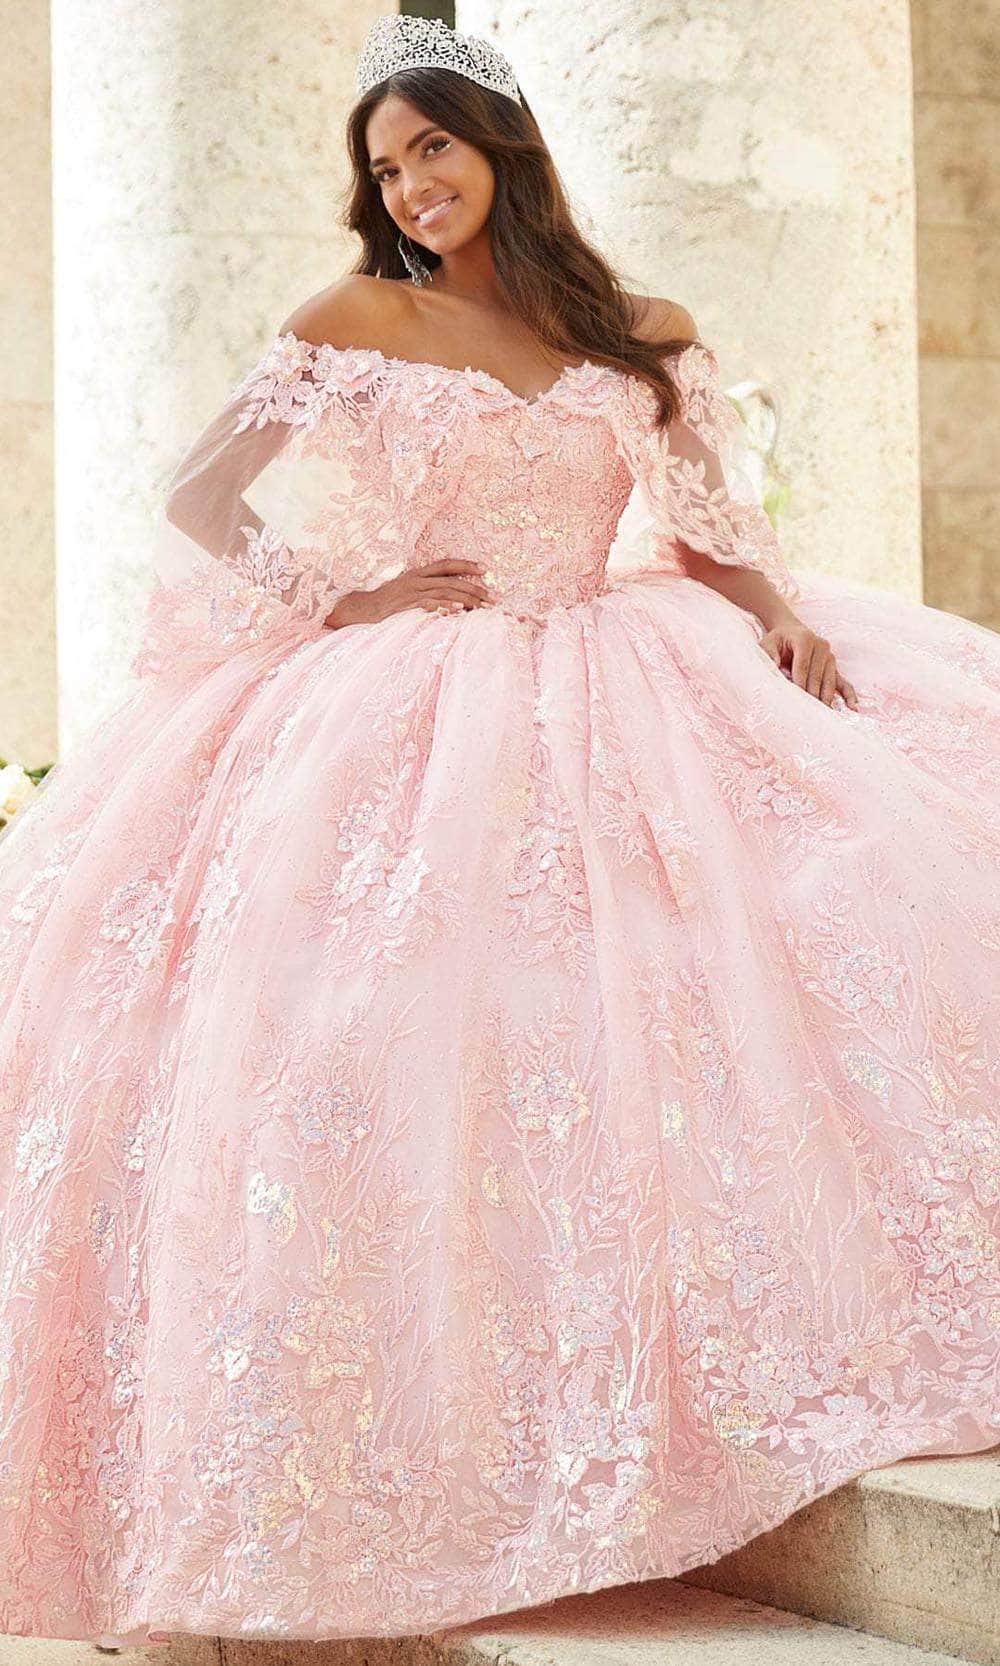 Quinceanera Collection 26029 - Strapless Embellished Ballgown Quinceanera Dresses 0 / Blush Pink